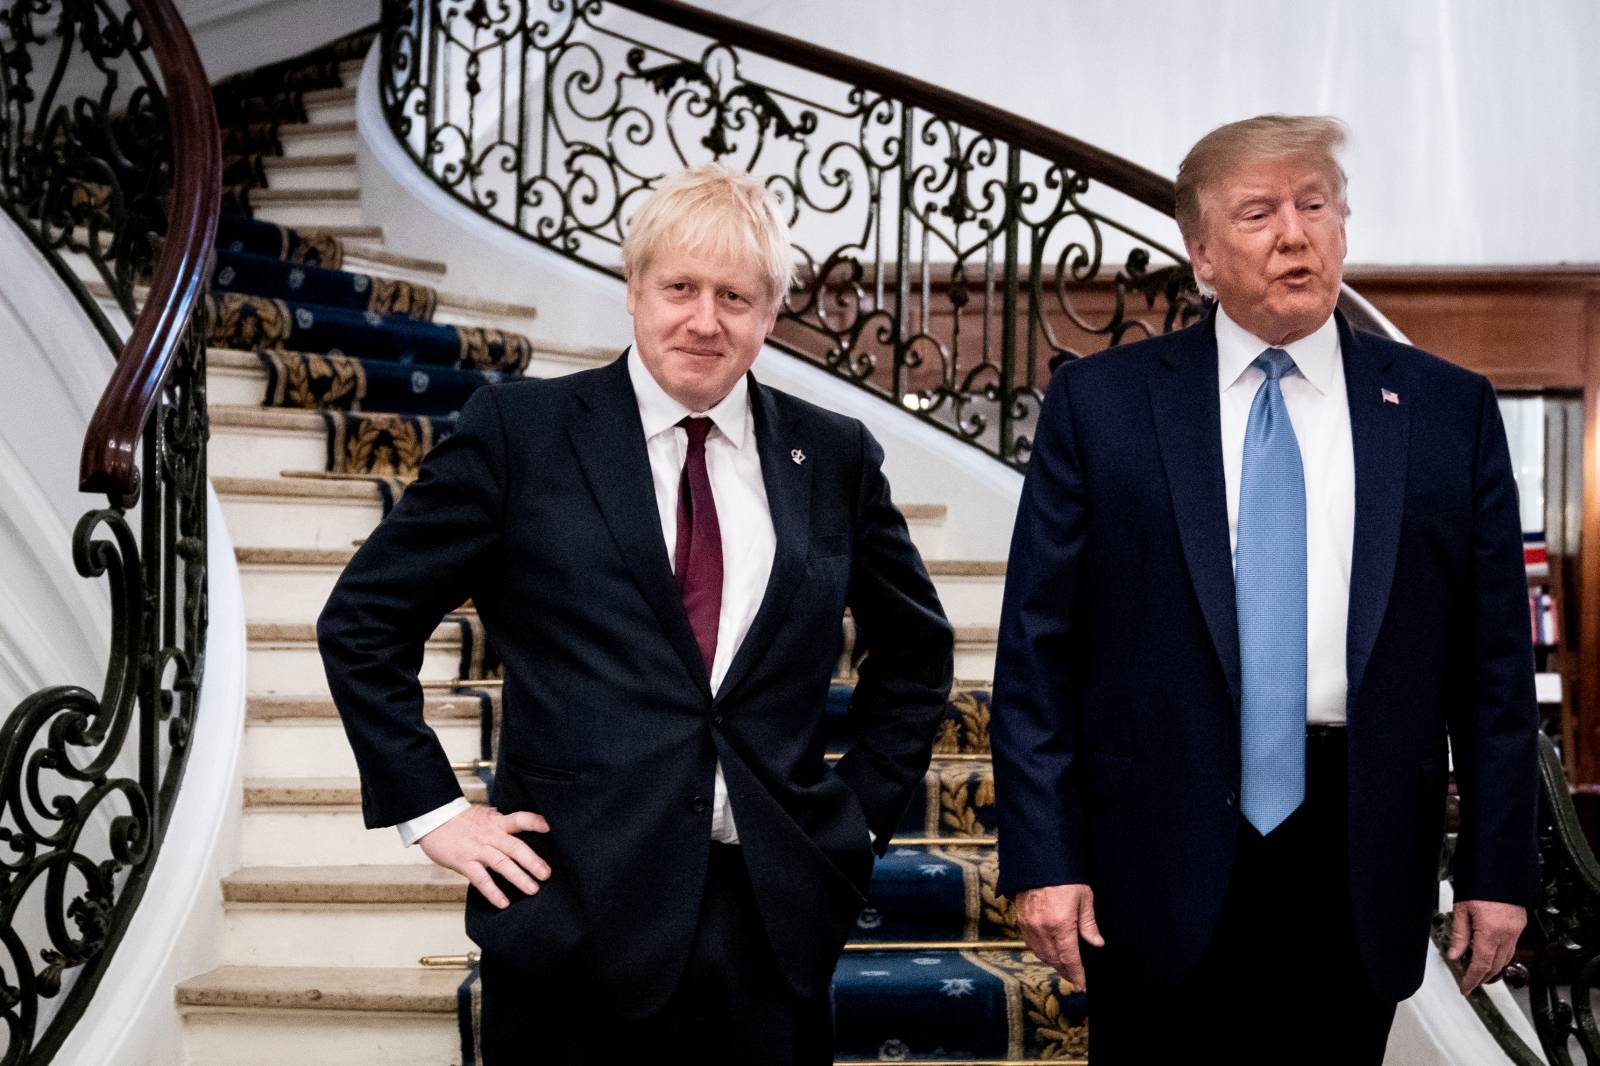 FILE PHOTO: U.S. President Donald Trump and Britain's Prime Minister Boris Johnson arrive for a bilateral meeting during the G7 summit in Biarritz, France